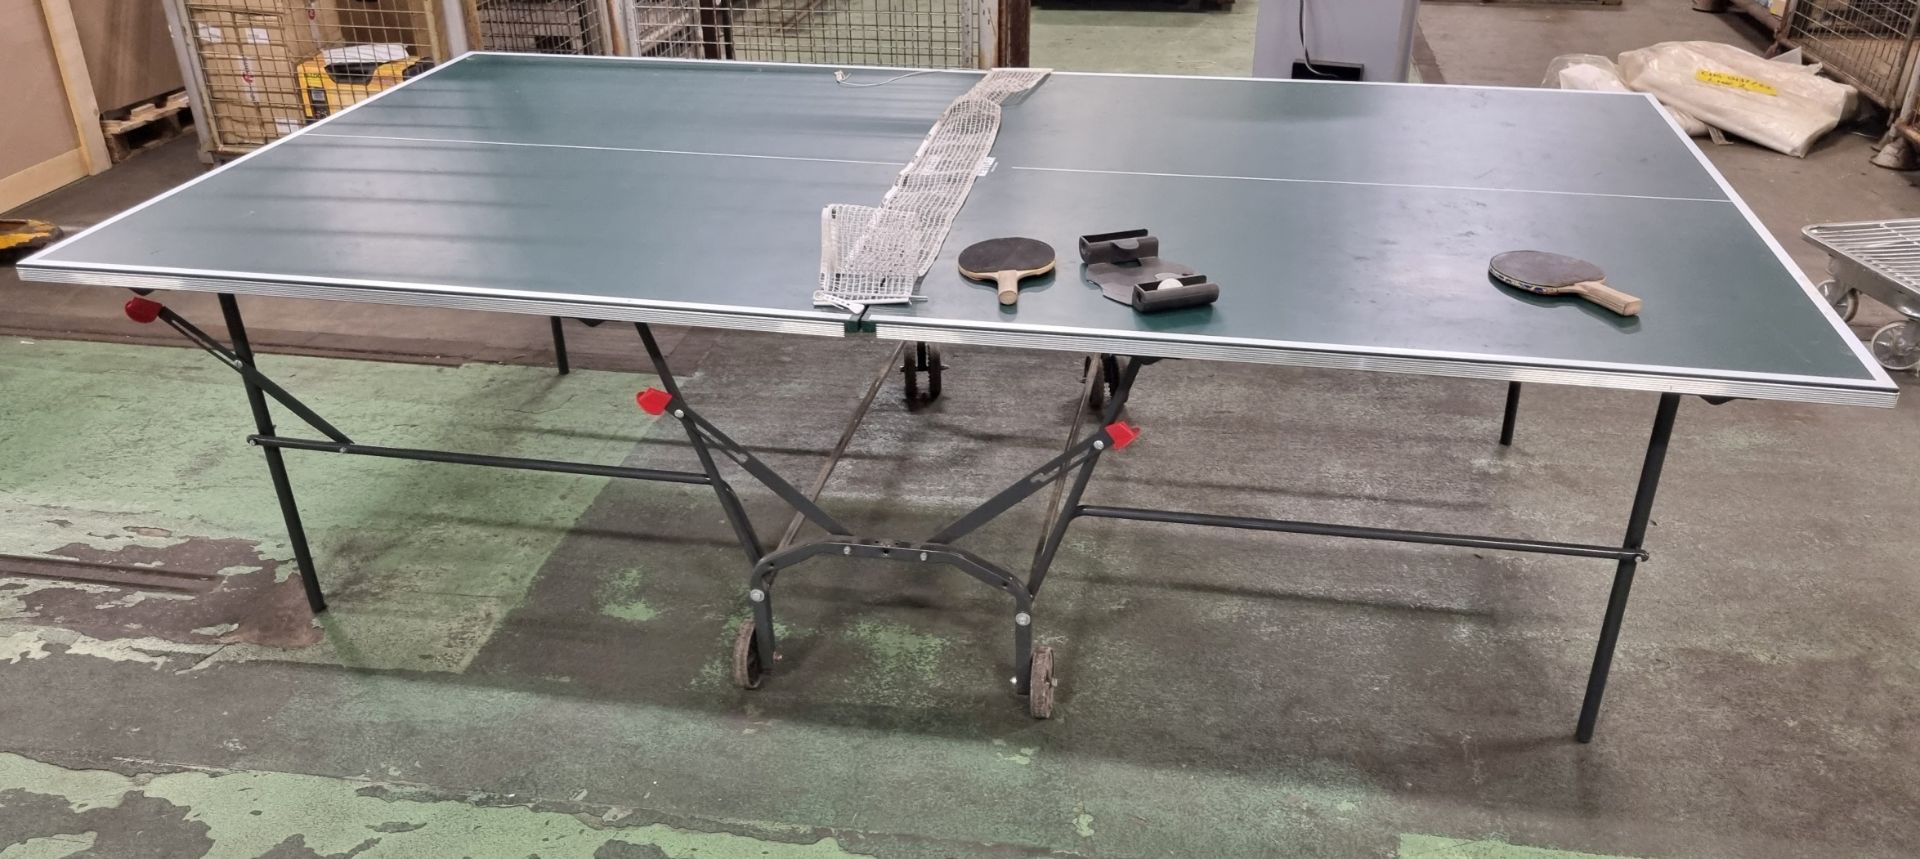 Kettler table tennis table including net, bats and ball in green cover - 276x153x76cm